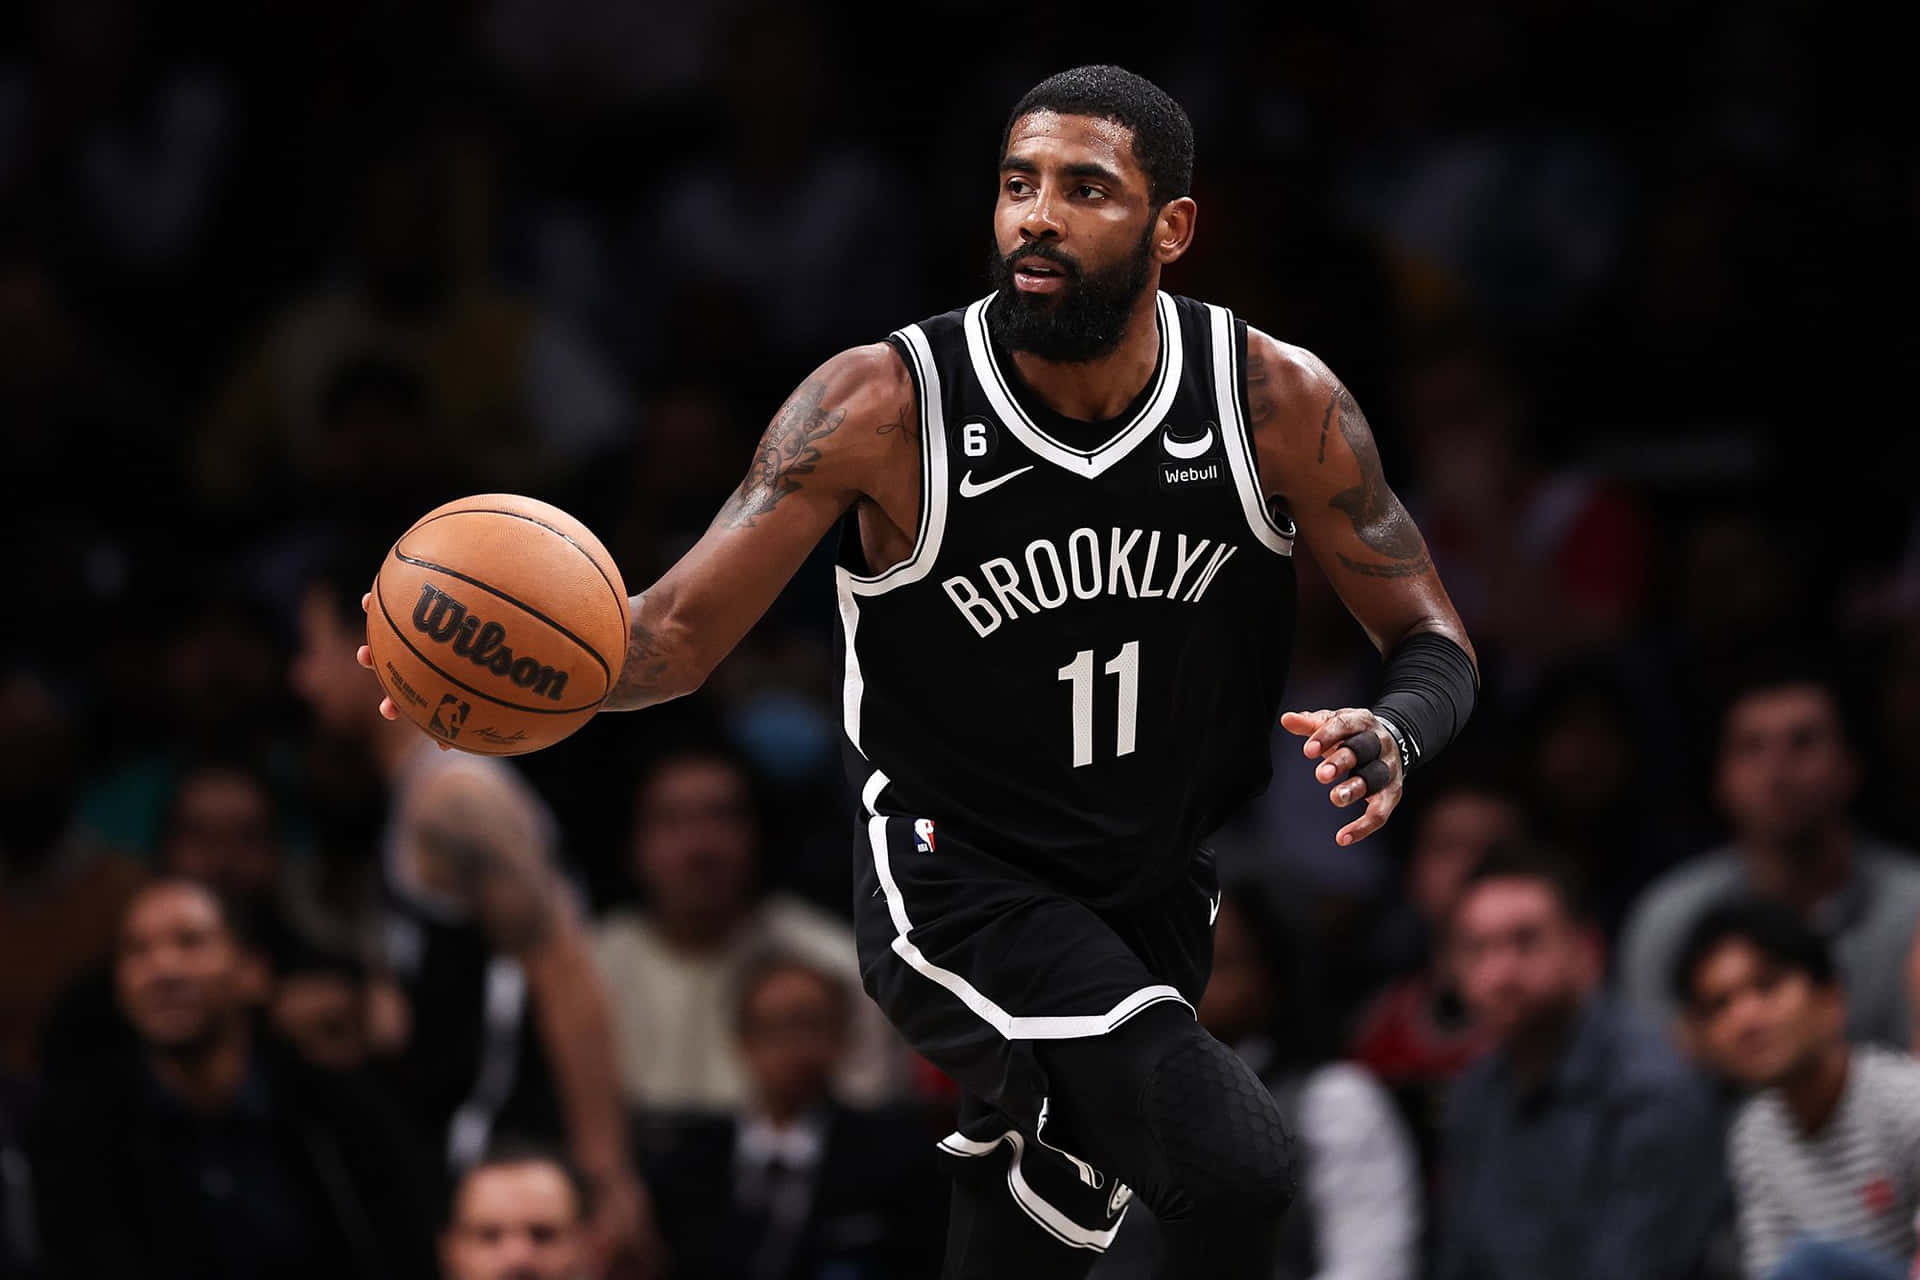 "Kyrie Irving Making Moves with the Brooklyn Nets" Wallpaper